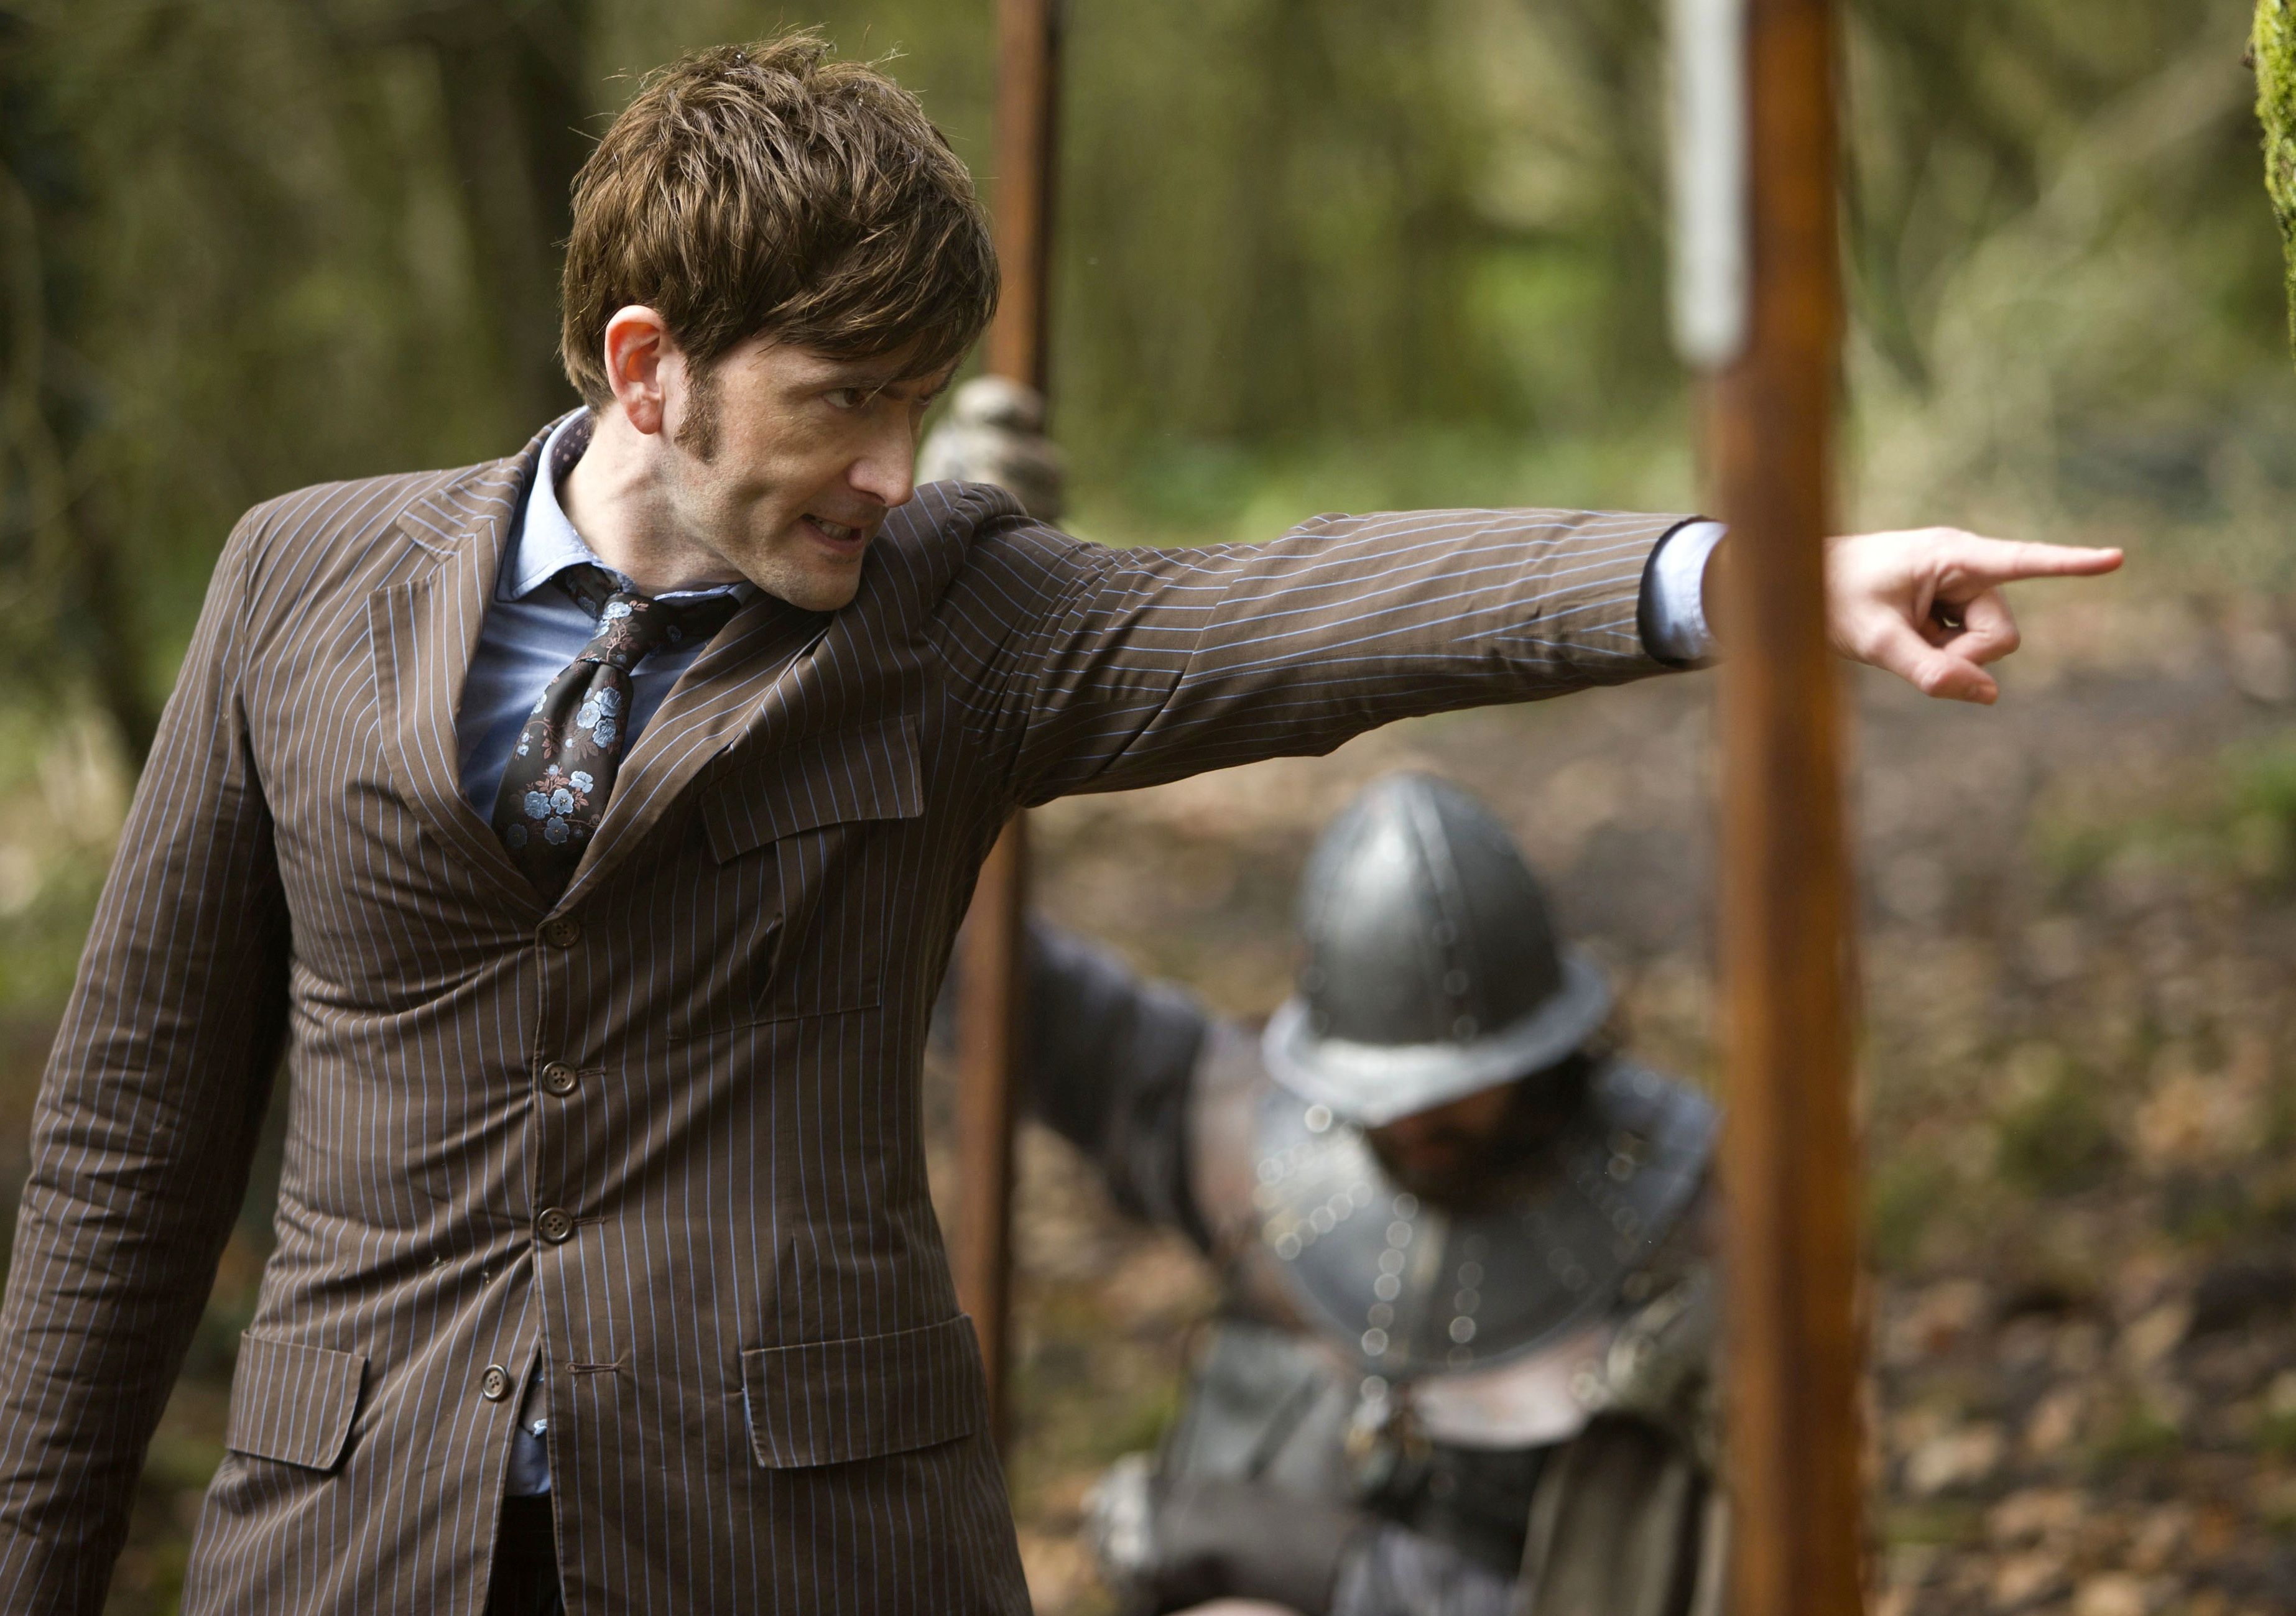 Doctor Who: The Day Of The Doctor Photo 1